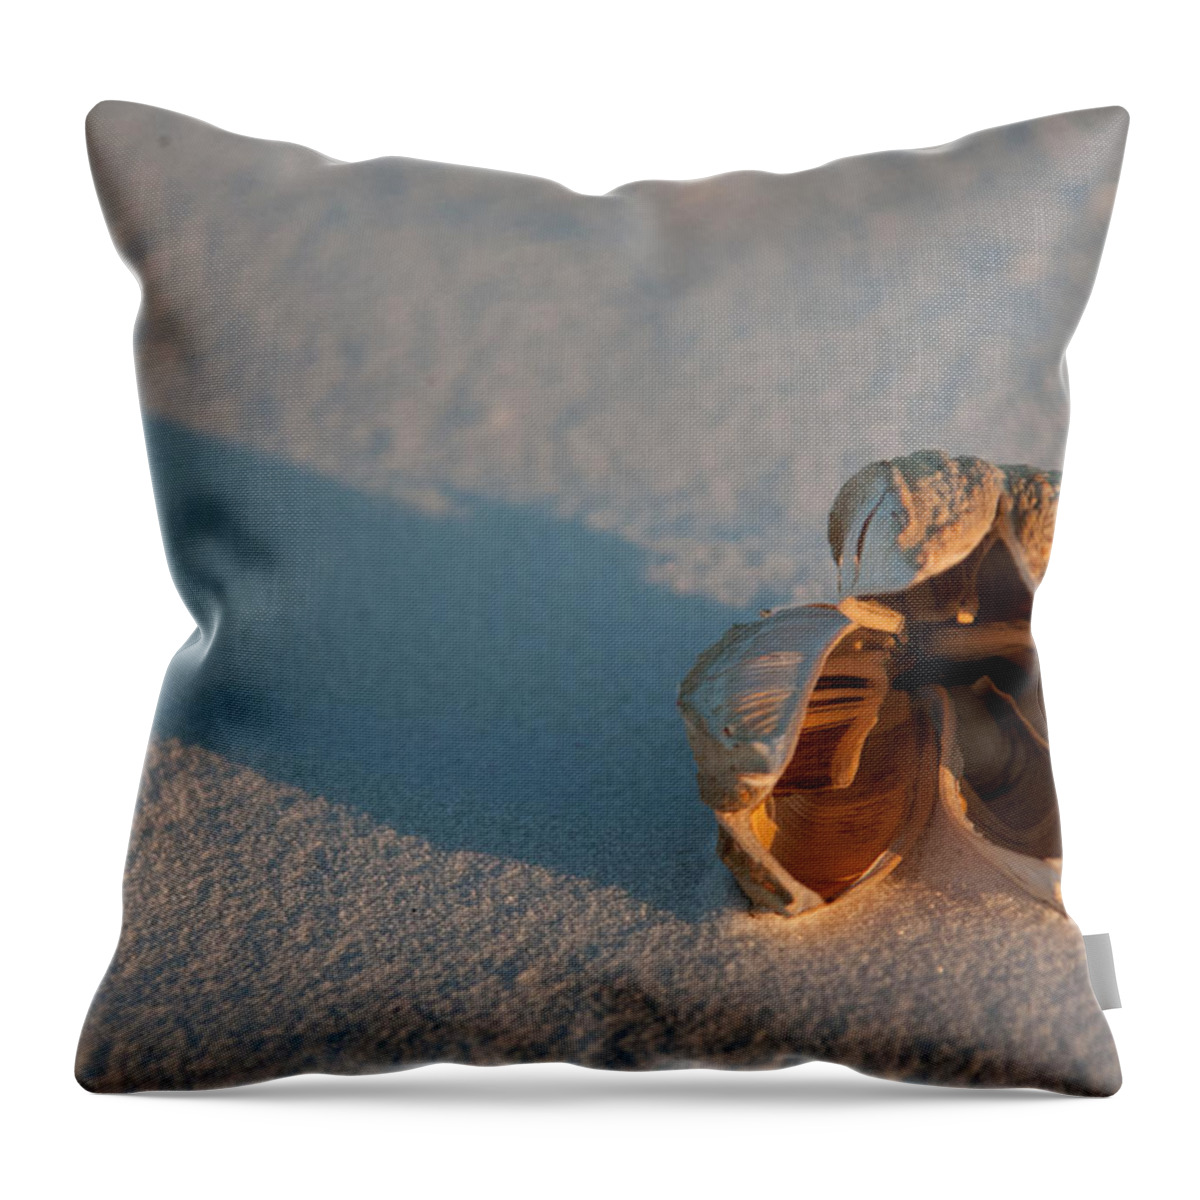 White Sands National Monument Throw Pillow featuring the photograph Silence by Ralf Kaiser